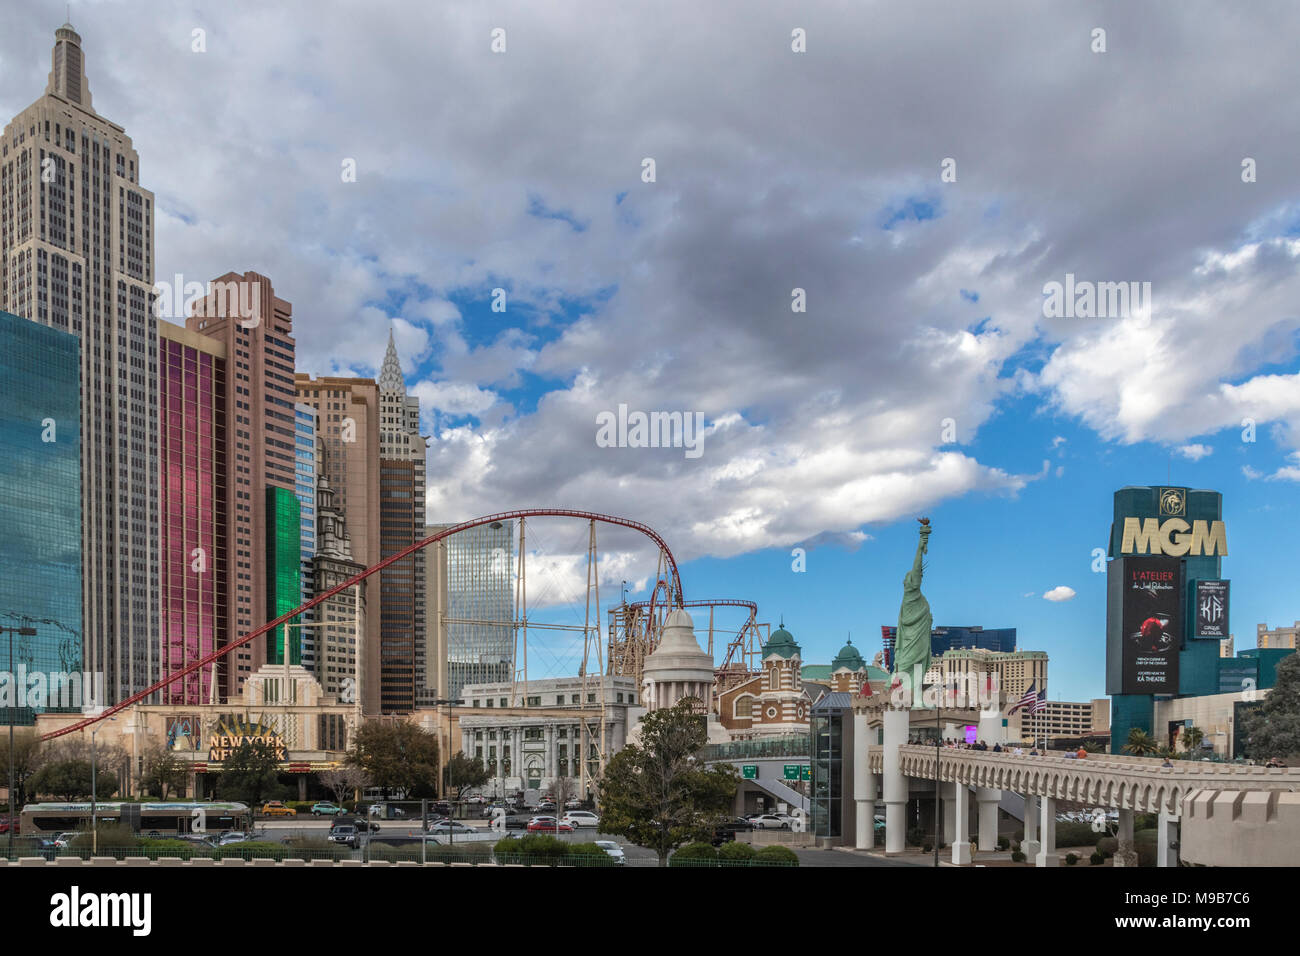 New York-New York hotel, resort and casino in Las Vegas, Nevada. Towers of hotel are designed to resemble New York buildings. Stock Photo